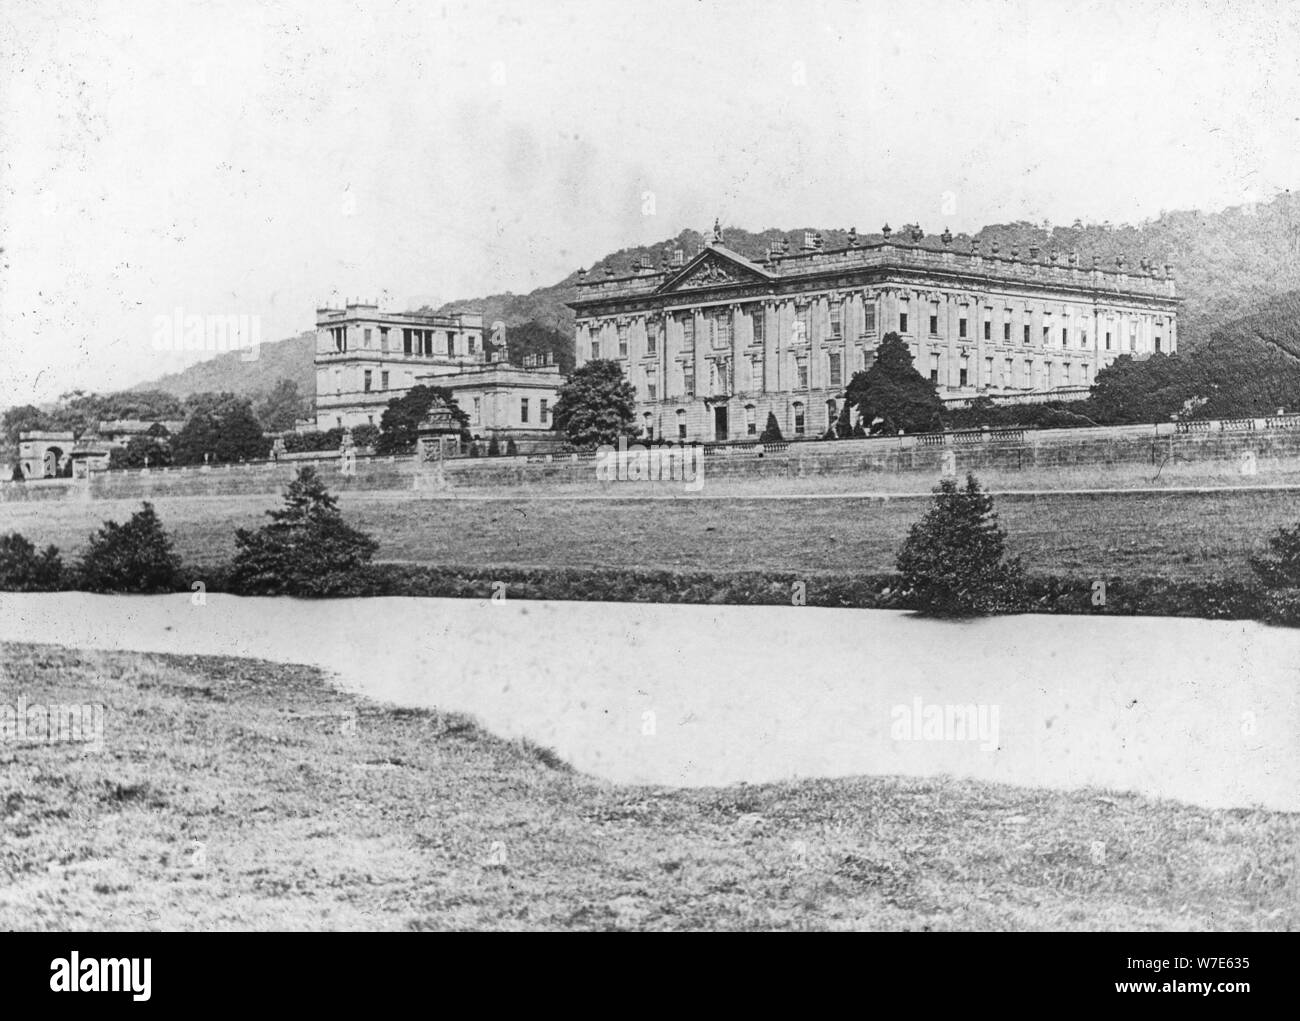 Chatsworth House from across the River Derwent, Derbyshire, late 19th or early 20th century. Artist: Unknown Stock Photo